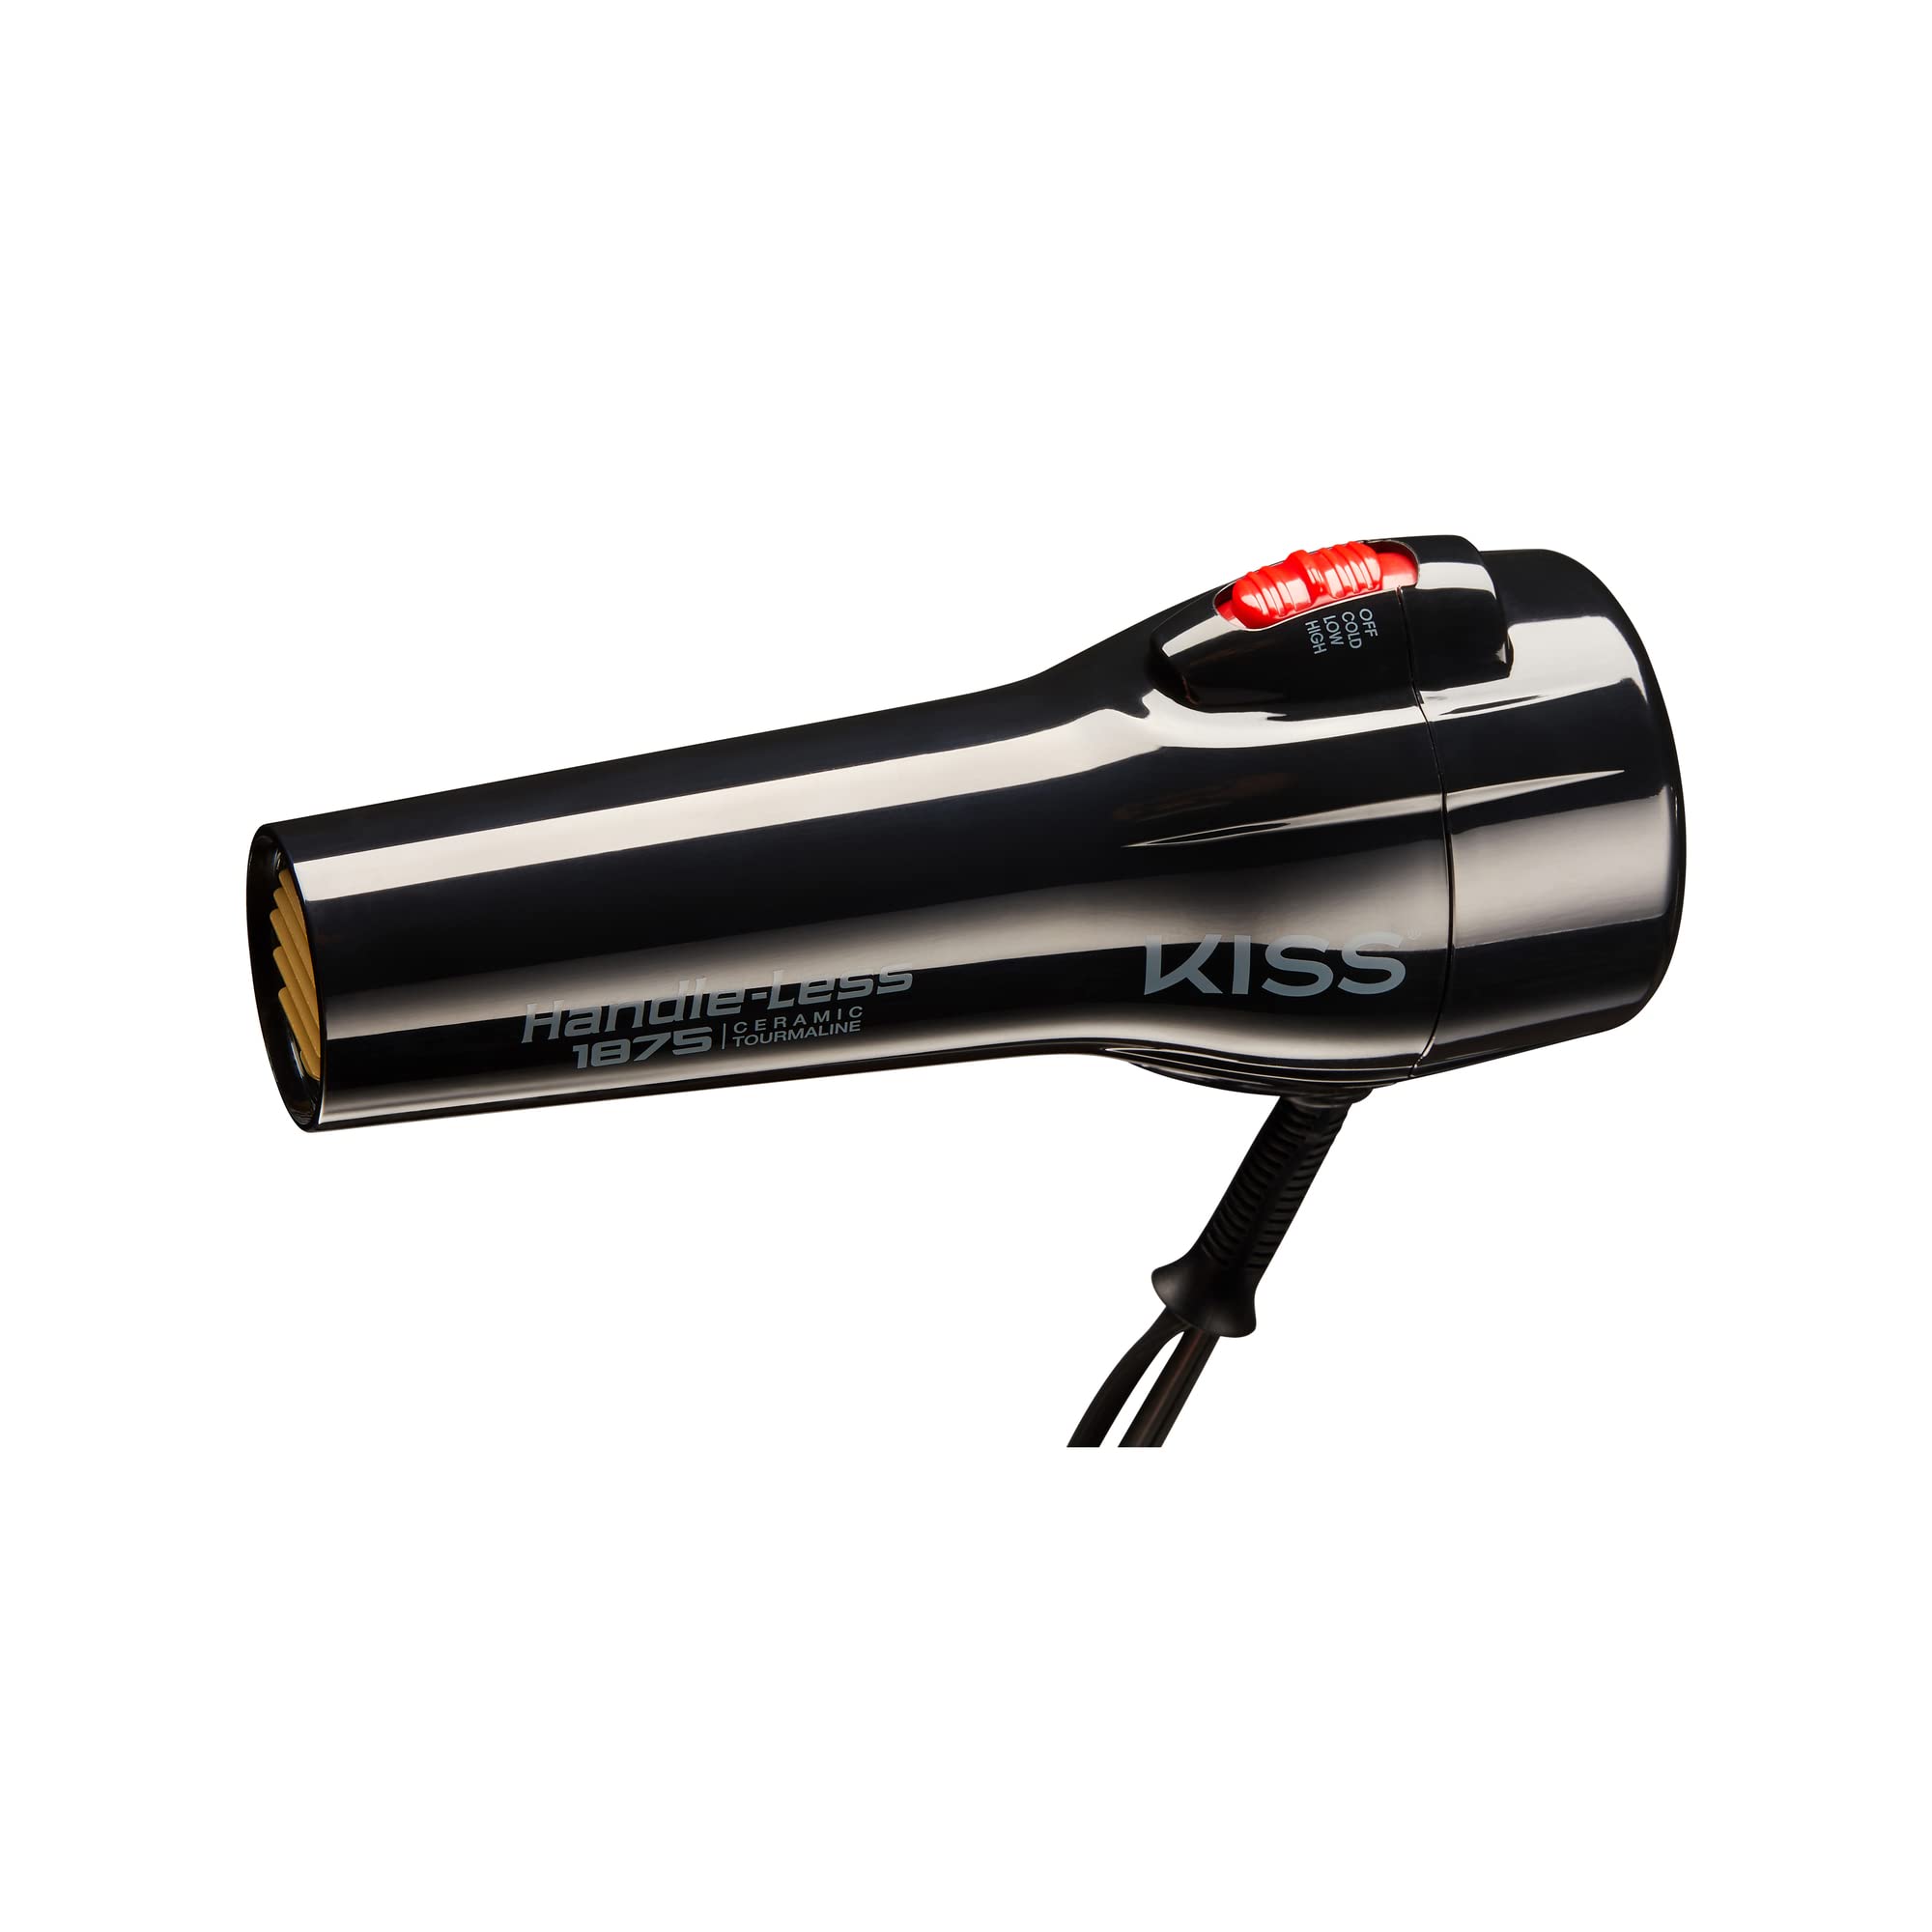 KISS Handle-Less 1875W Ceramic Tourmaline Hair Dryer, Effortless Styling Precision Blow Dryer, Cool Touch Nozzle, Triple-Layer Heat Insulation Technology, Heat Resistant Cap, 3 Styling Attachments